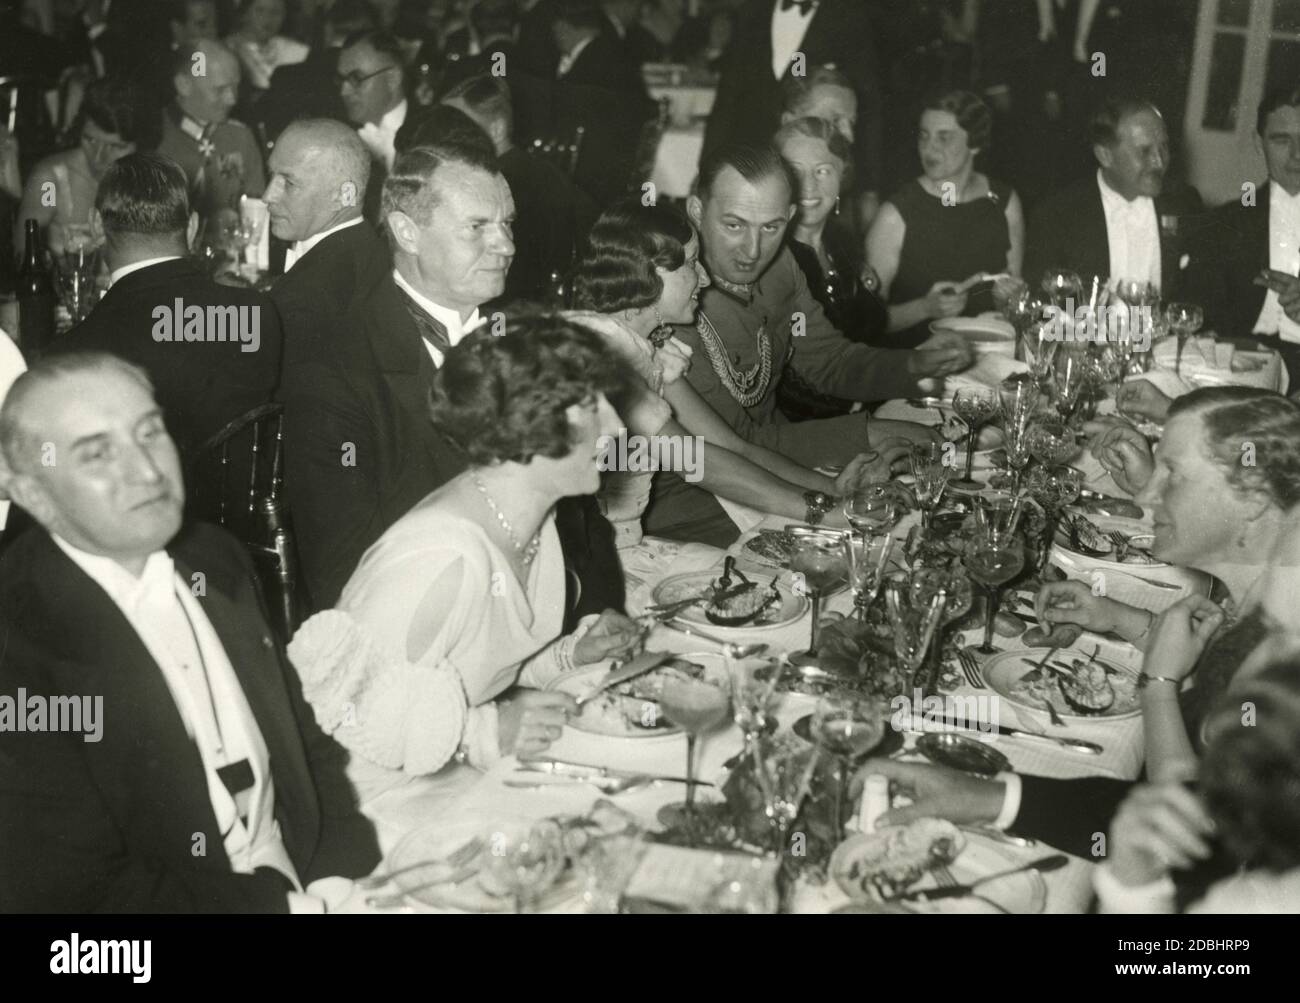 On November 25, 1933 or 1934, the Verein der auslaendischen Presse (Association of Foreign Press) held a ball at the Hotel Adlon in Berlin, which was attended by many diplomats and foreign policy experts. Sitting (from left to right): the Italian ambassador Vittorio Cerruti, Jacqueline Dillais (wife of the French ambassador Andre Francois-Poncet), the Lord Mayor of Berlin Heinrich Sahm, Miss Wearing and Police General and Ministerial Director Kurt Daluege. Stock Photo